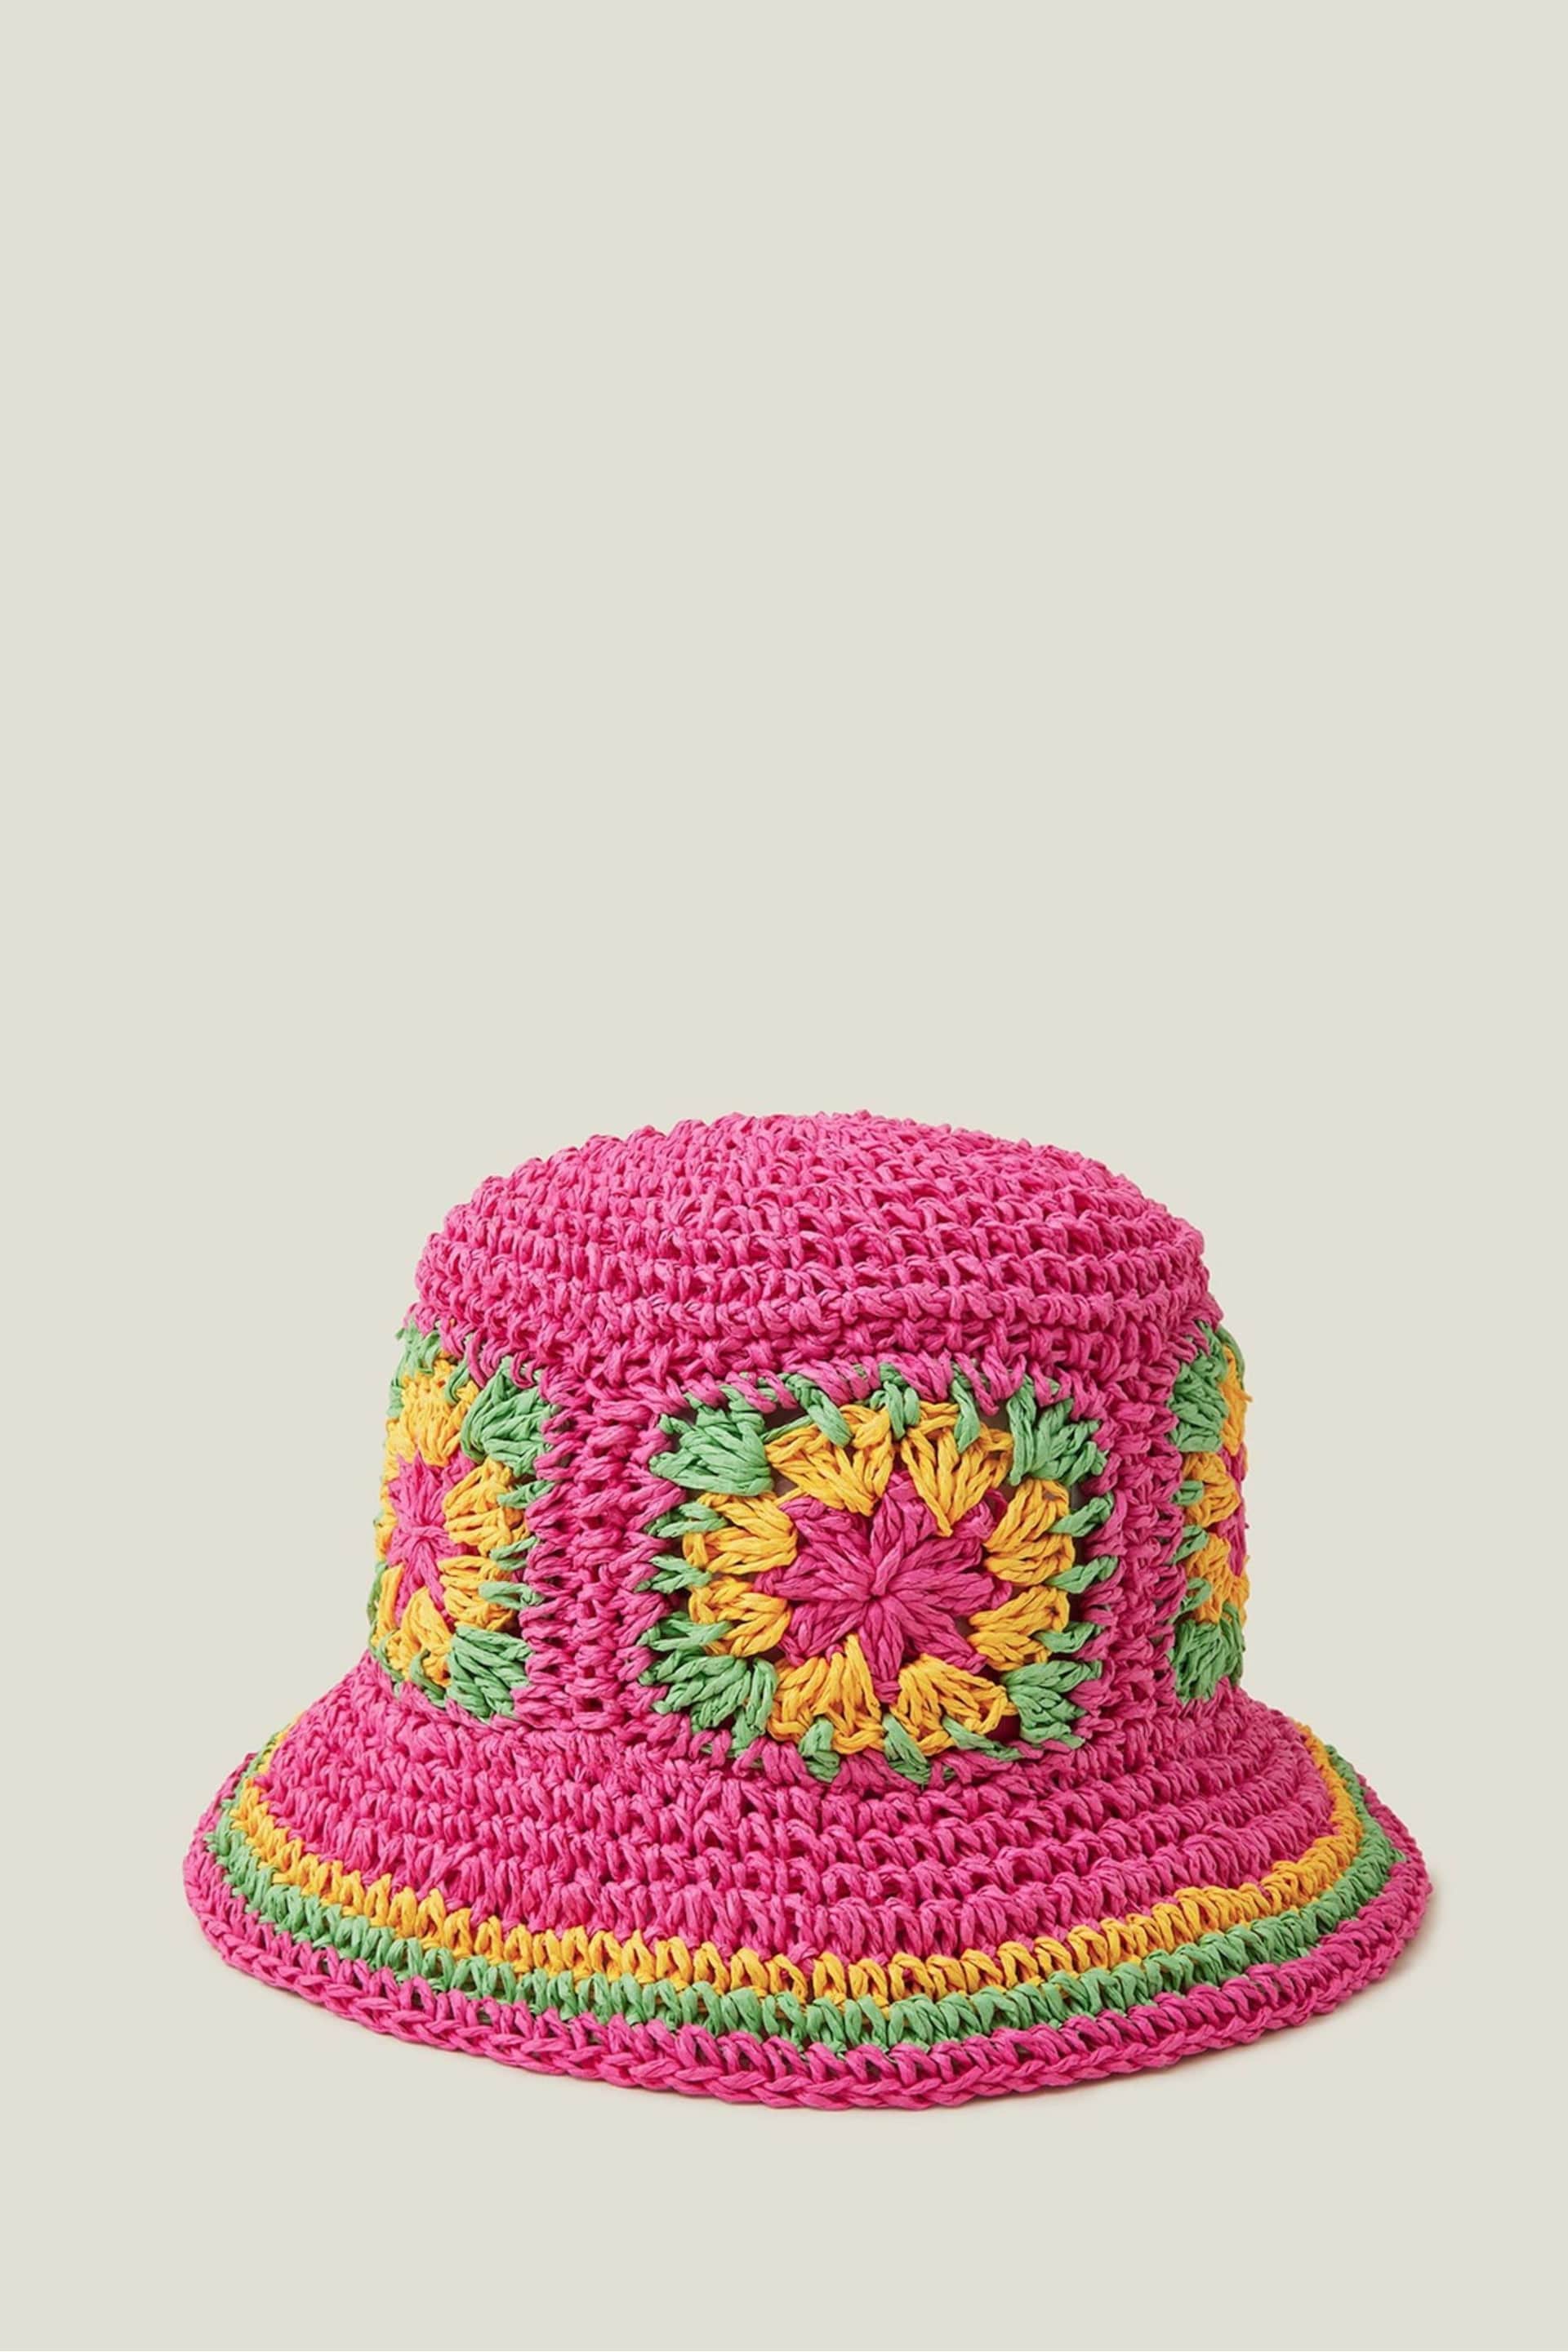 Angels By Accessorize Girls Pink Crochet Packable Hat - Image 3 of 3